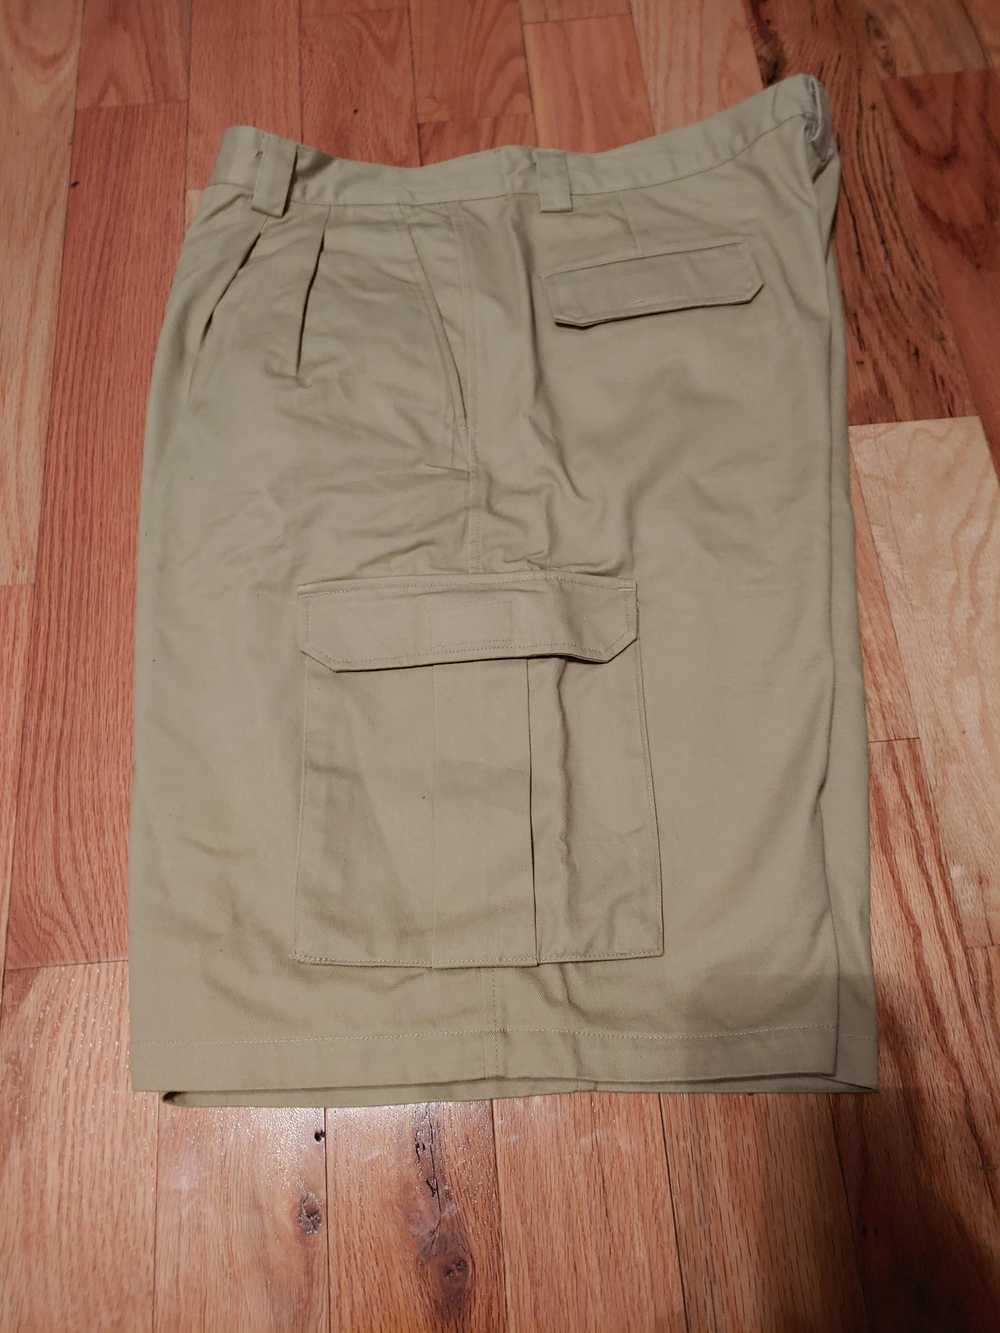 Other No Limit Soldier Cargo Shorts - image 3